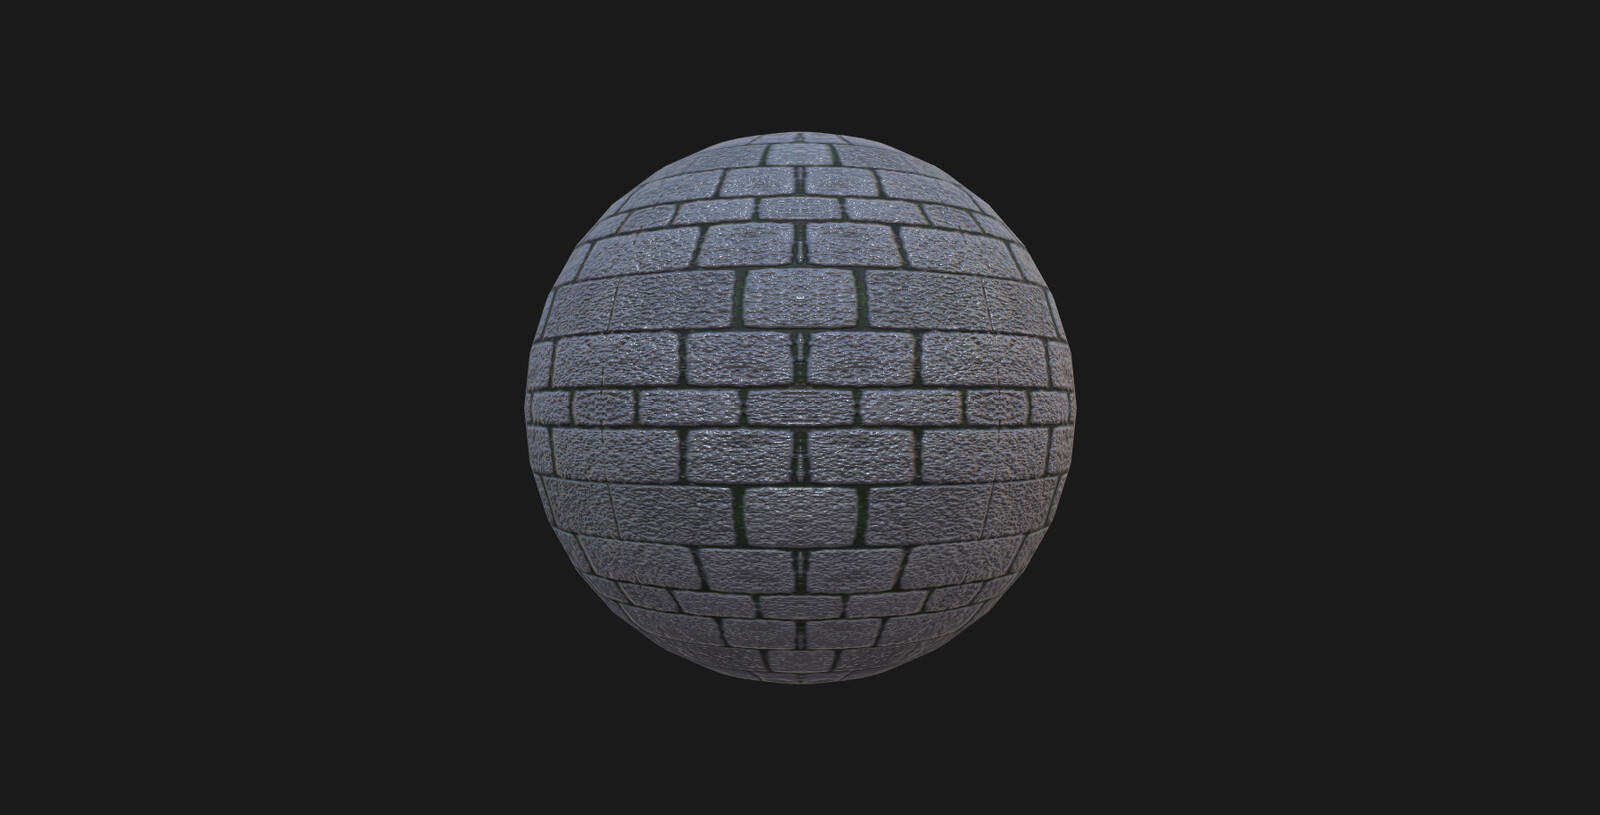 Renderd with shadermap